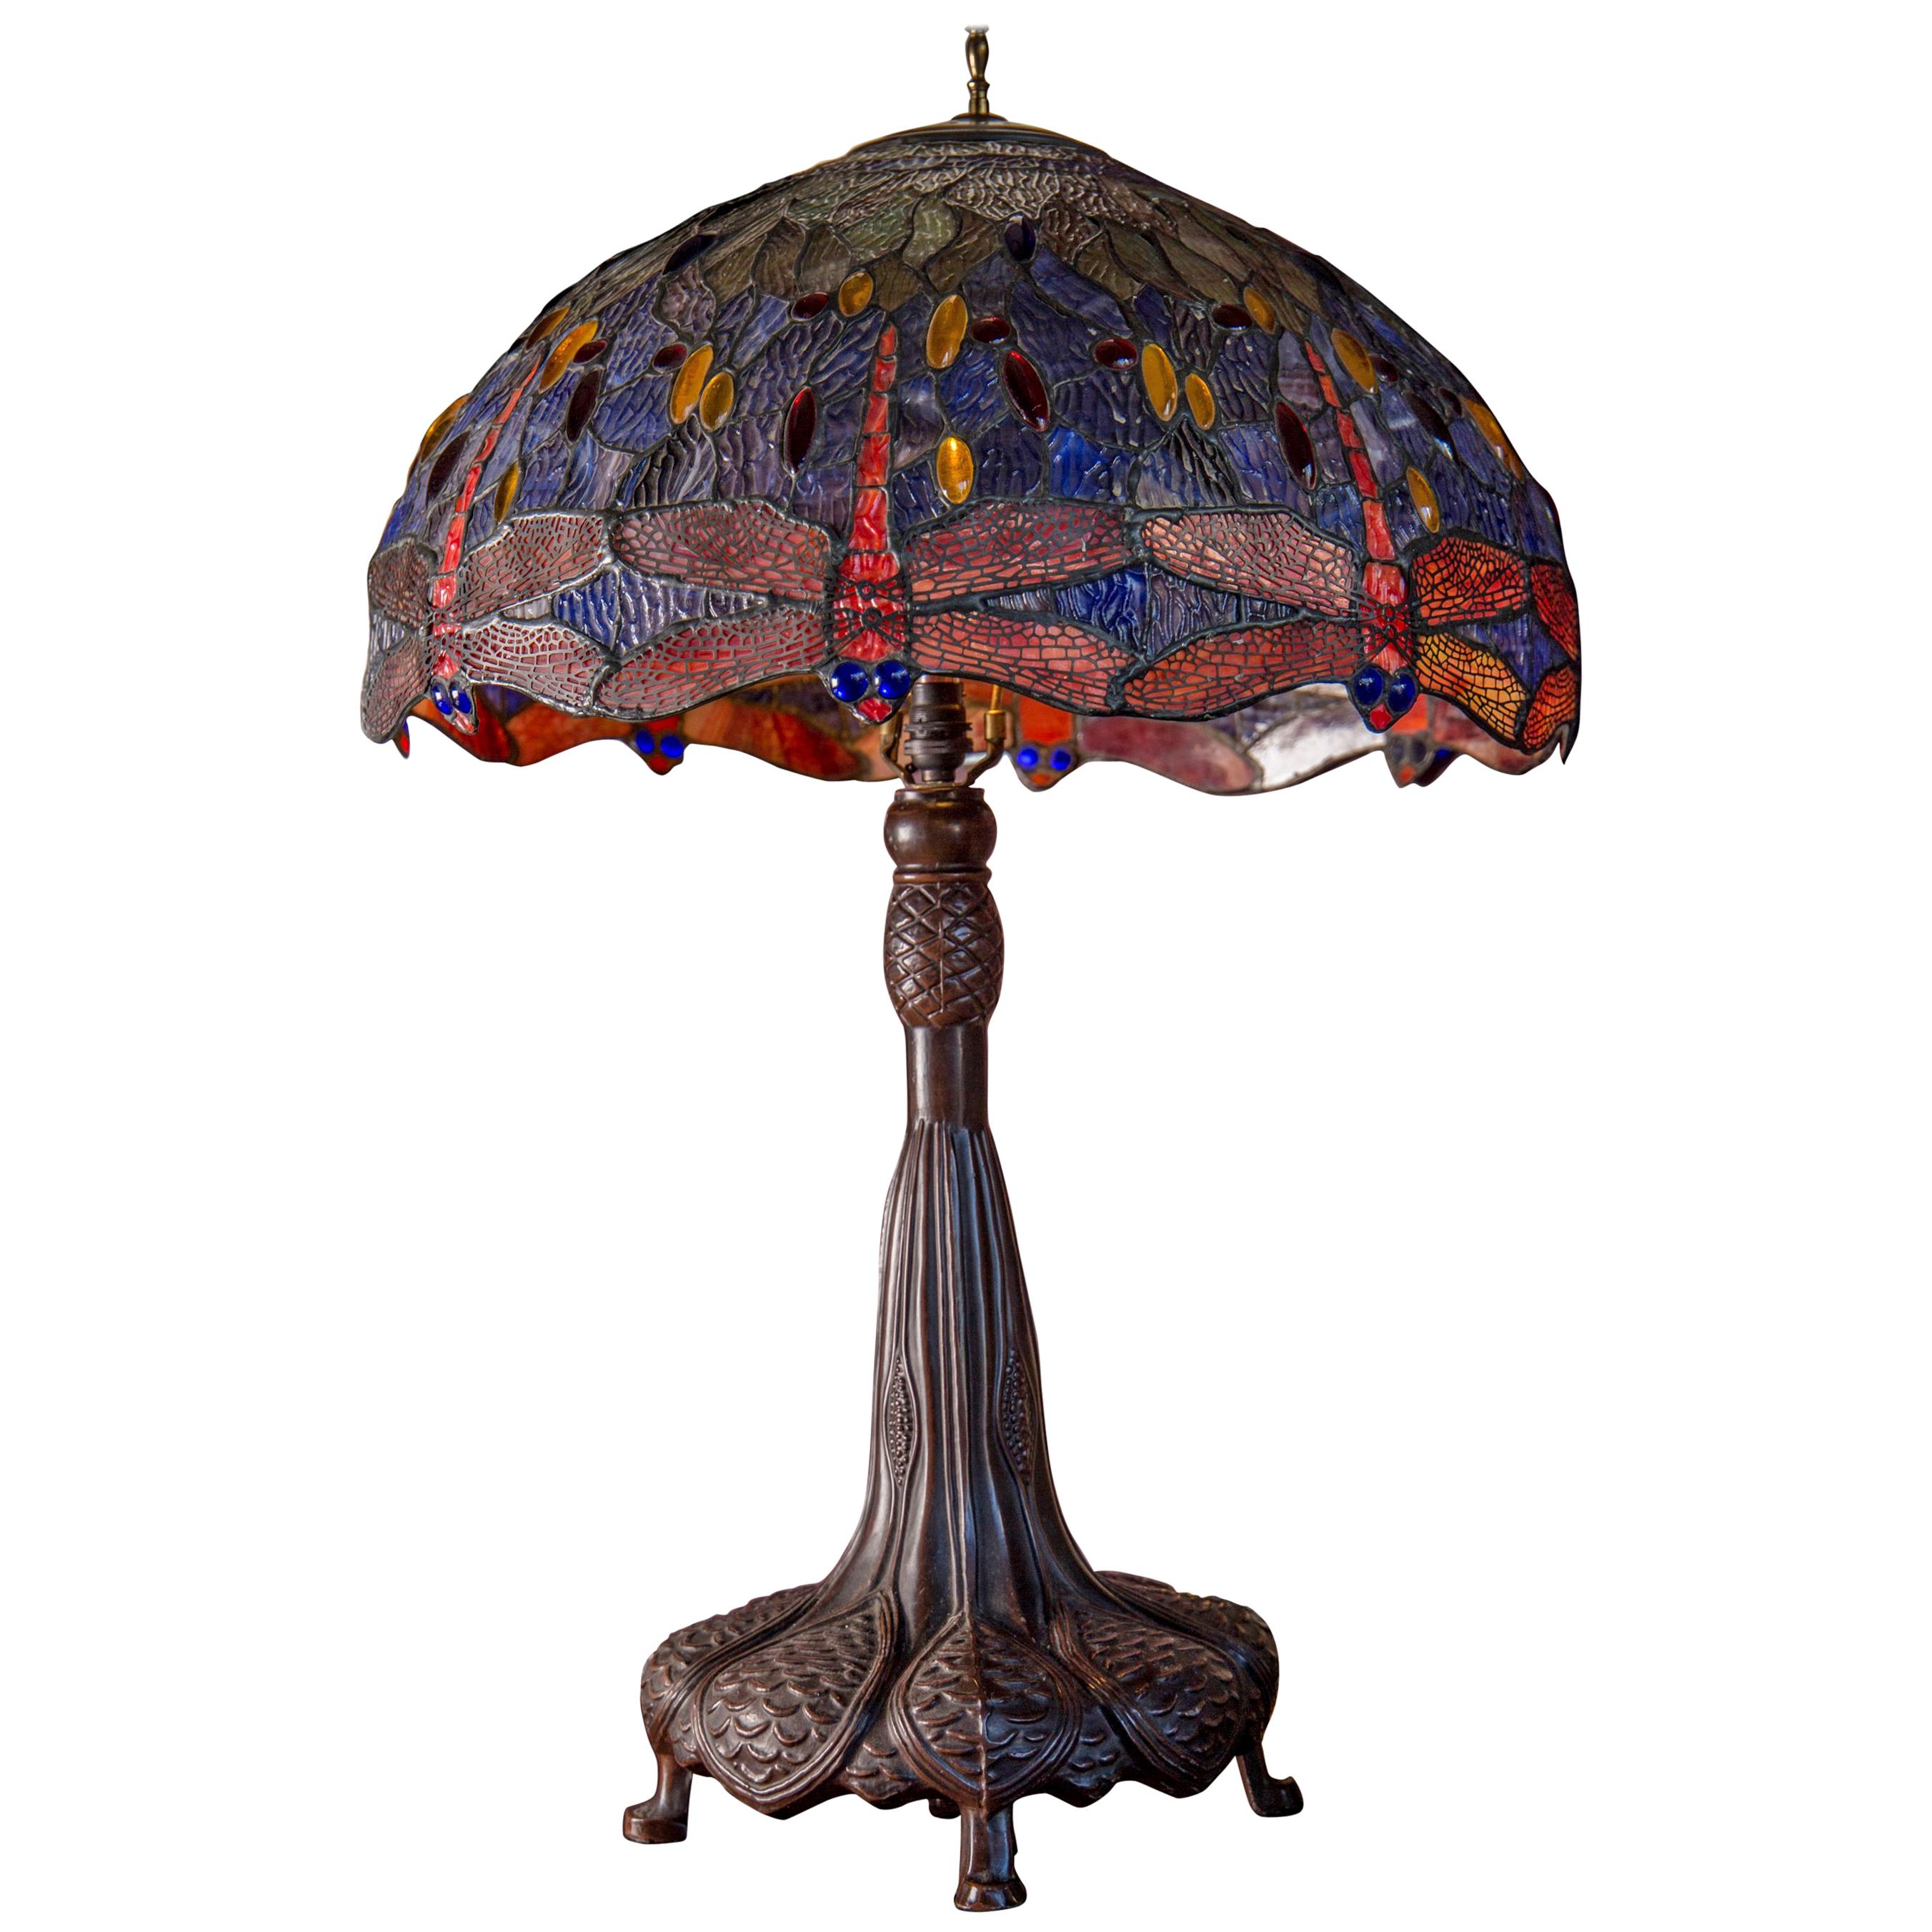 Large Scale Leaded Glass Table Lamp in the Style of Tiffany Studios New York